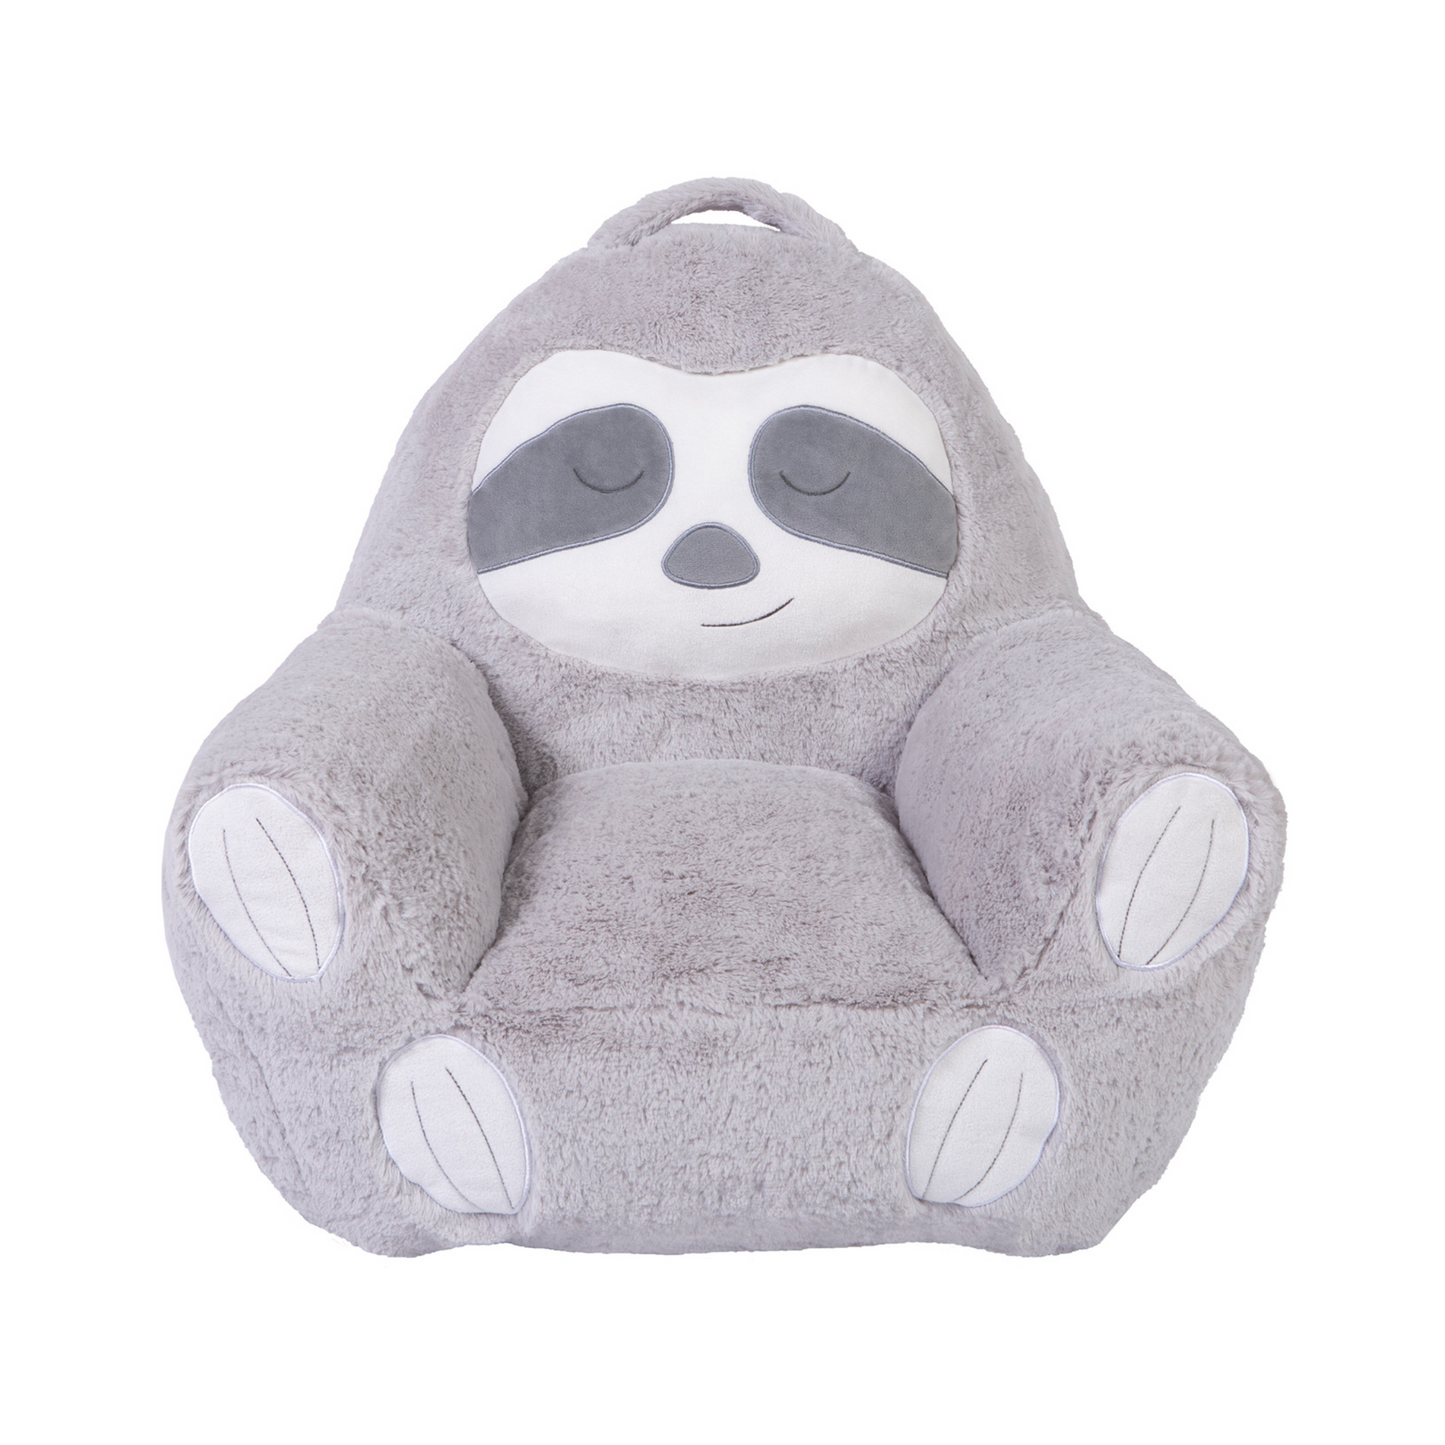 Toddler Sloth Plush Character Chair by Cuddo Buddies® - front view